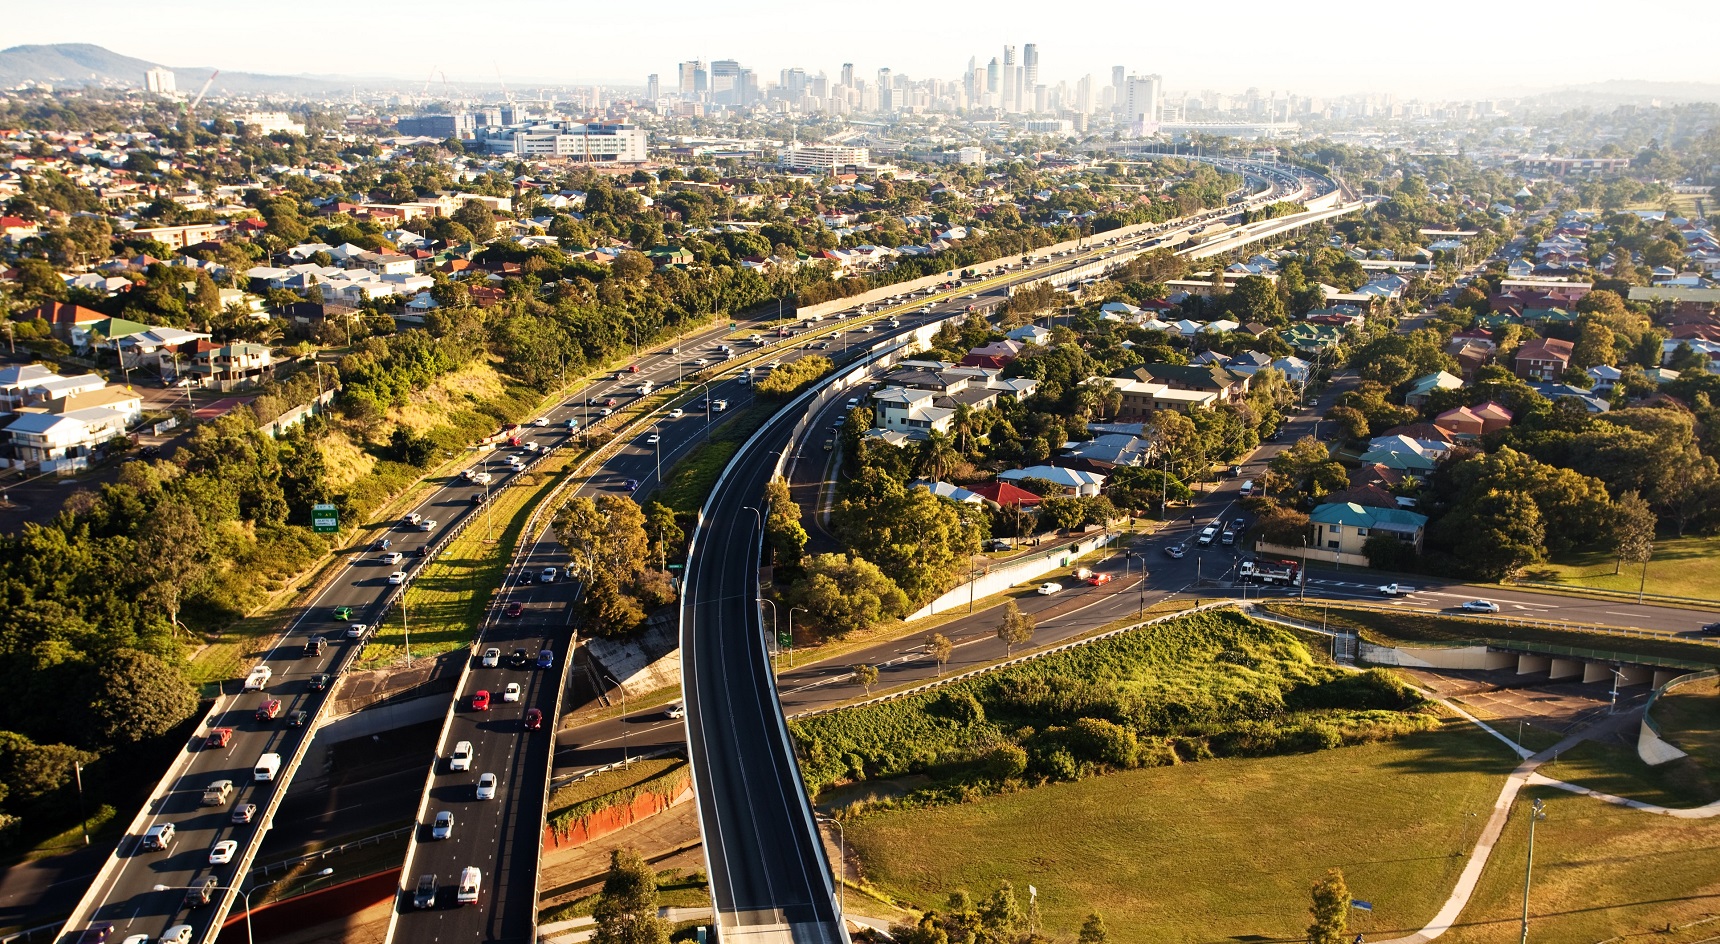 Queensland was the most recent state to adopt mandatory real-time fuel pricing.